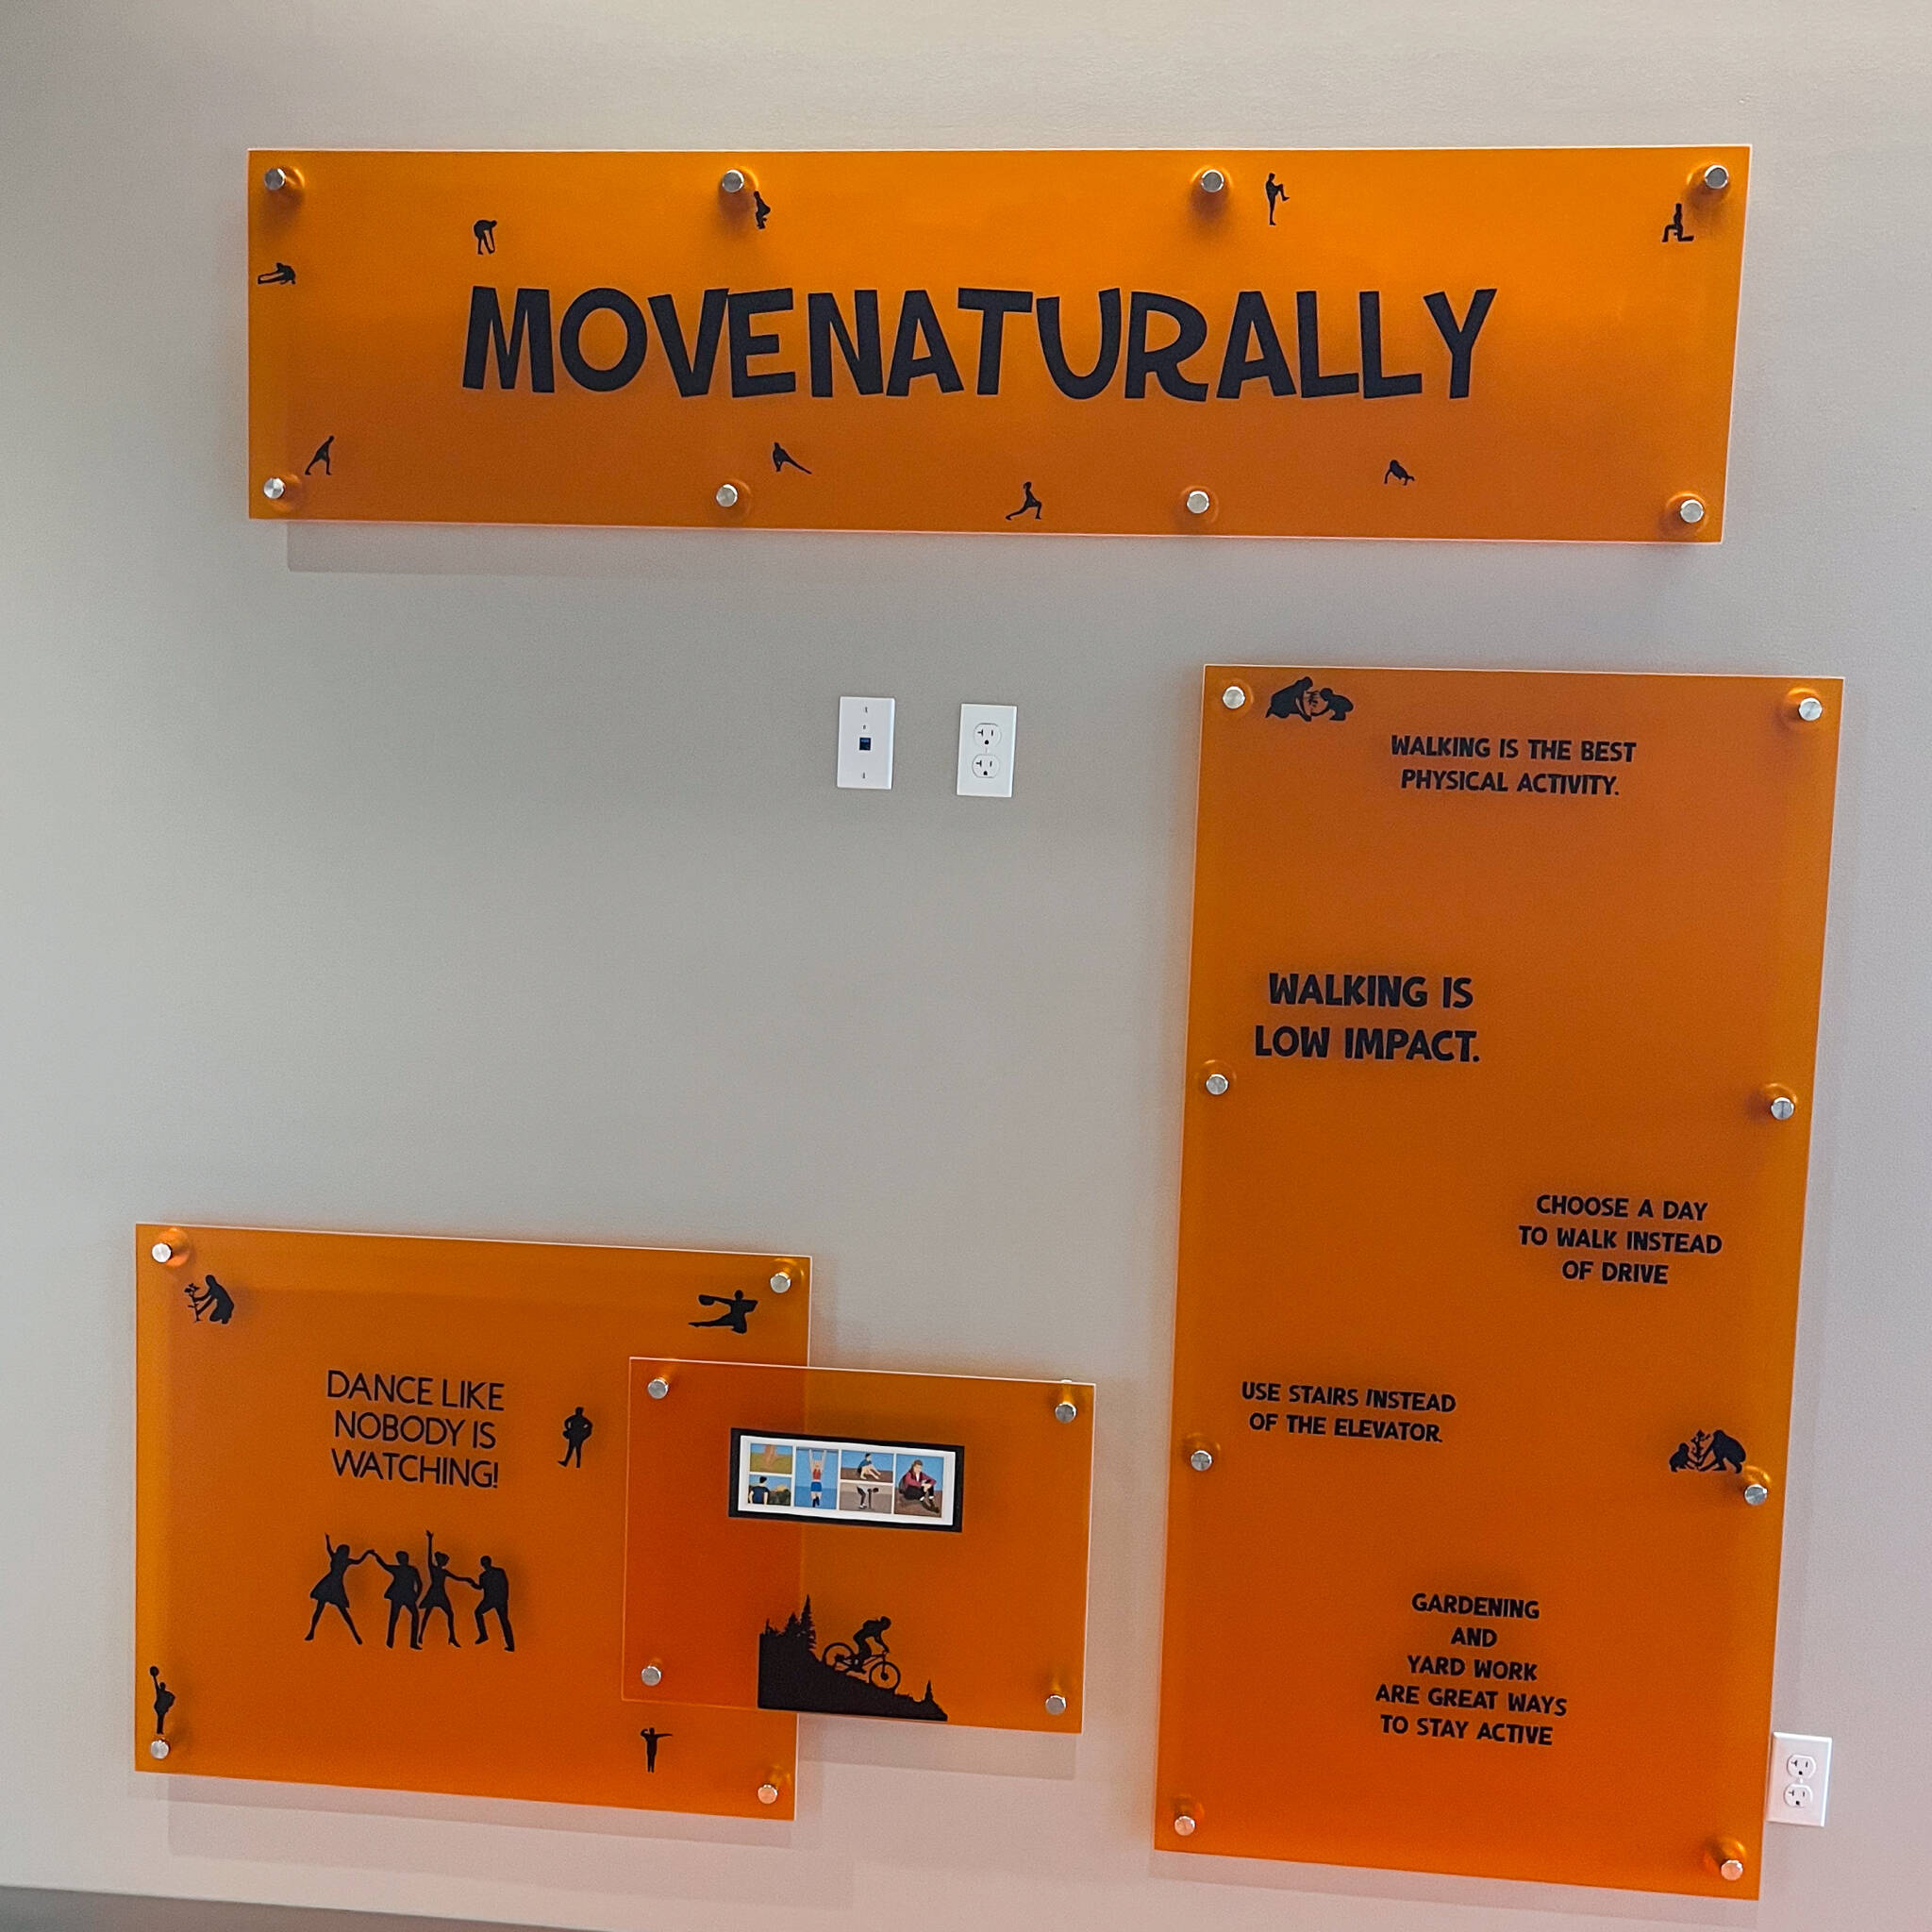 Signage explaining how to move naturally at the wellness center